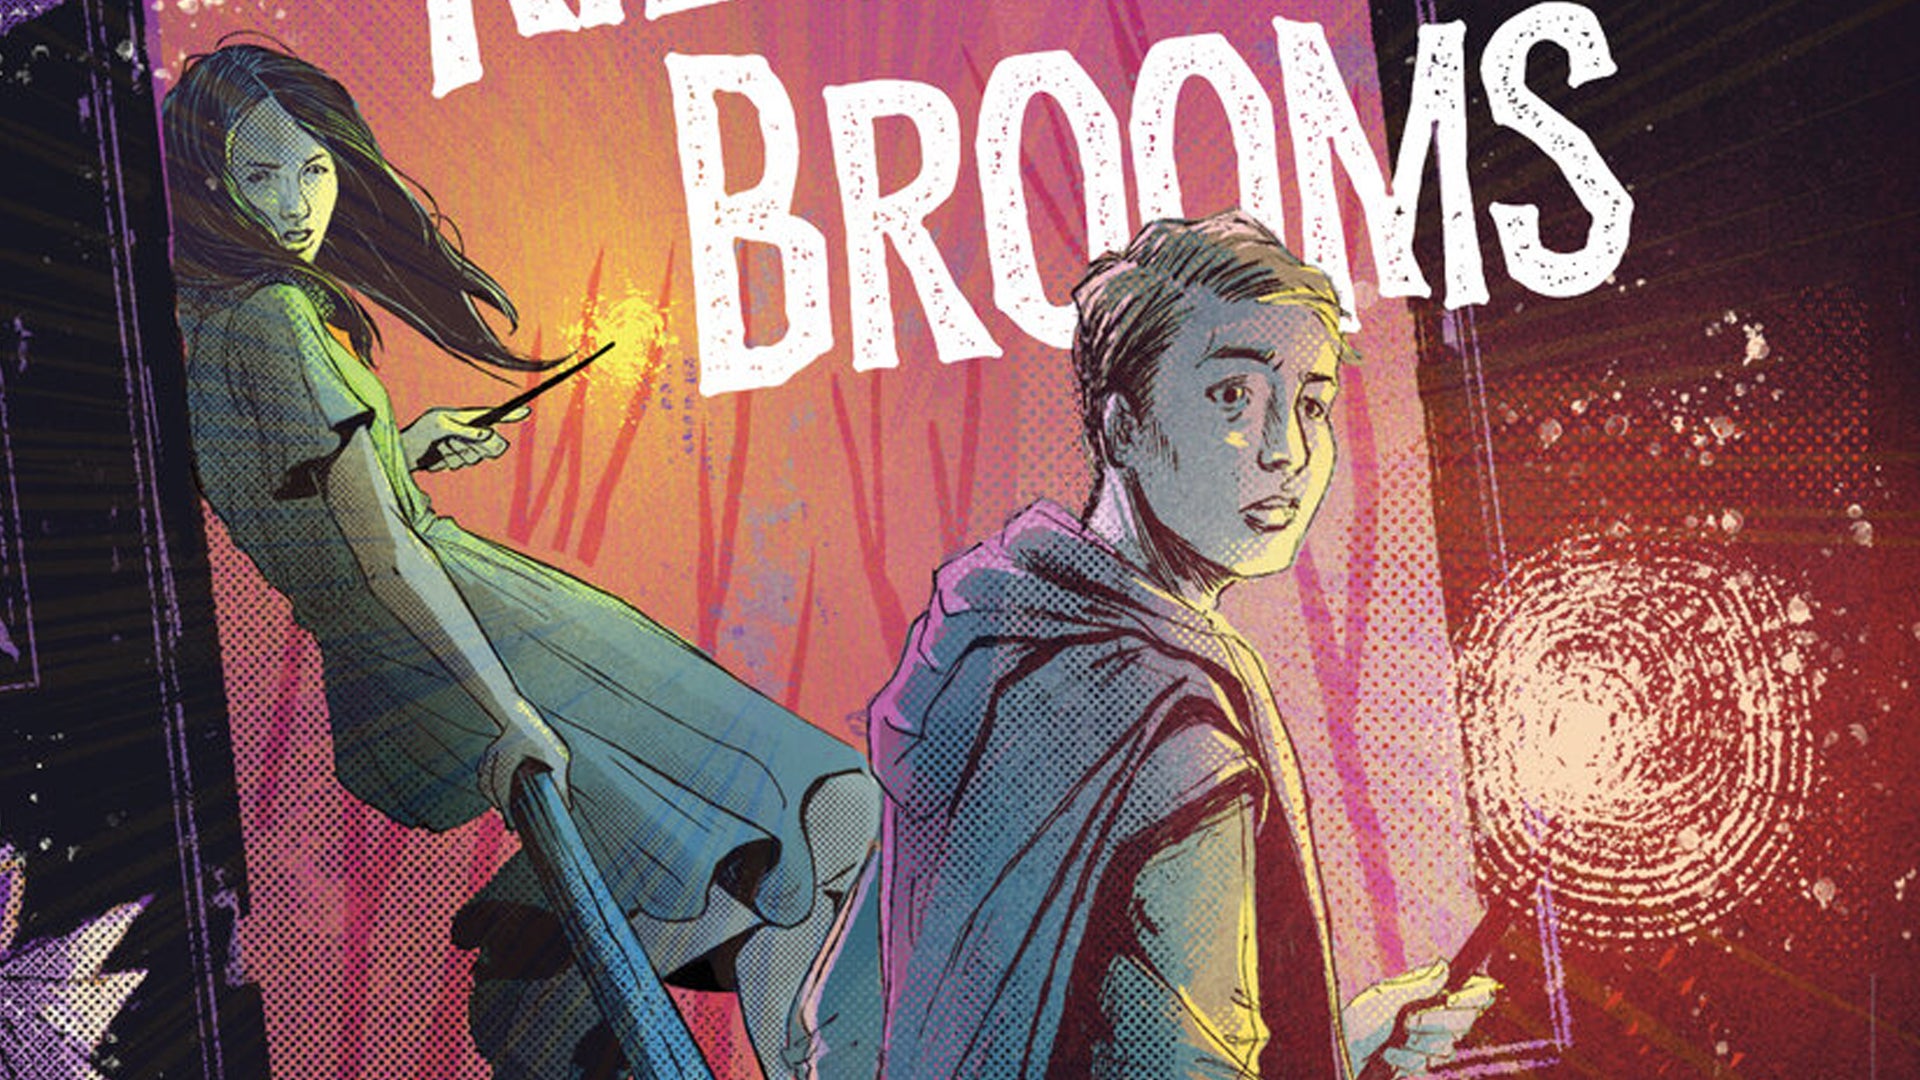 Image for Kids on Brooms is a Harry Potter tabletop RPG in all but name, out this summer